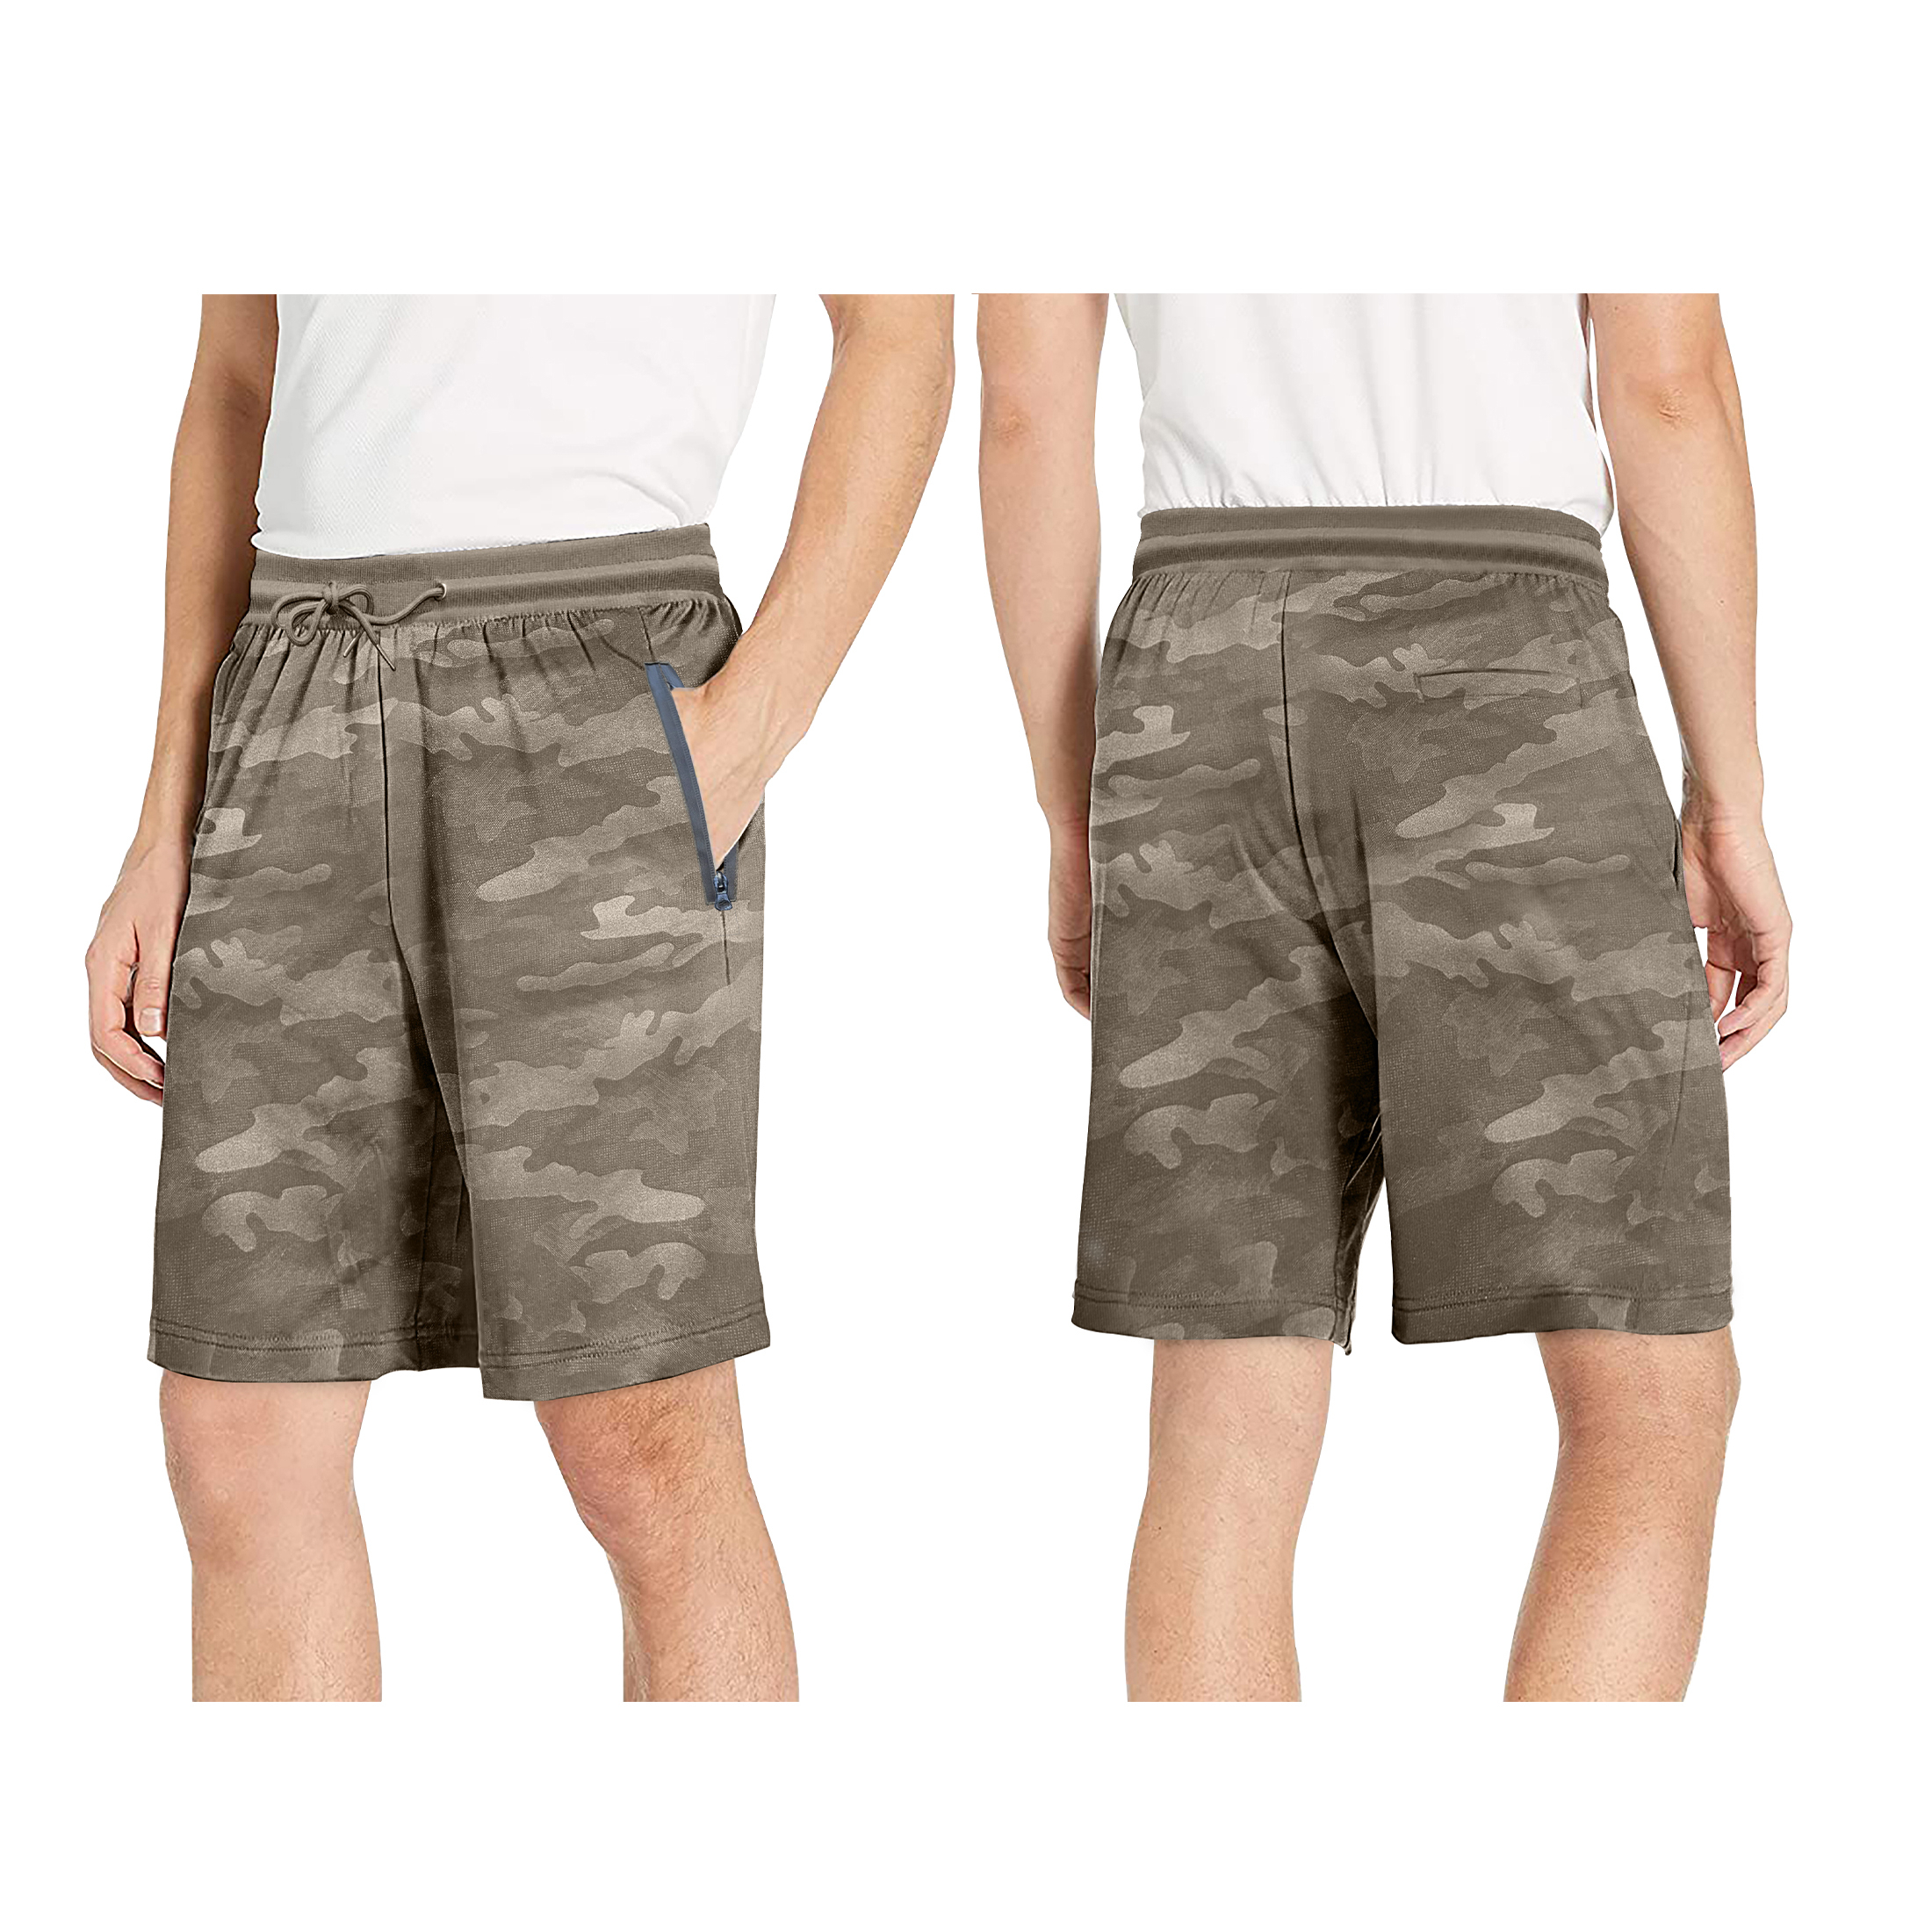 Men's Quick Dry Camo-Print Athletic Performance Active Running Scuba Shorts - Olive, Small